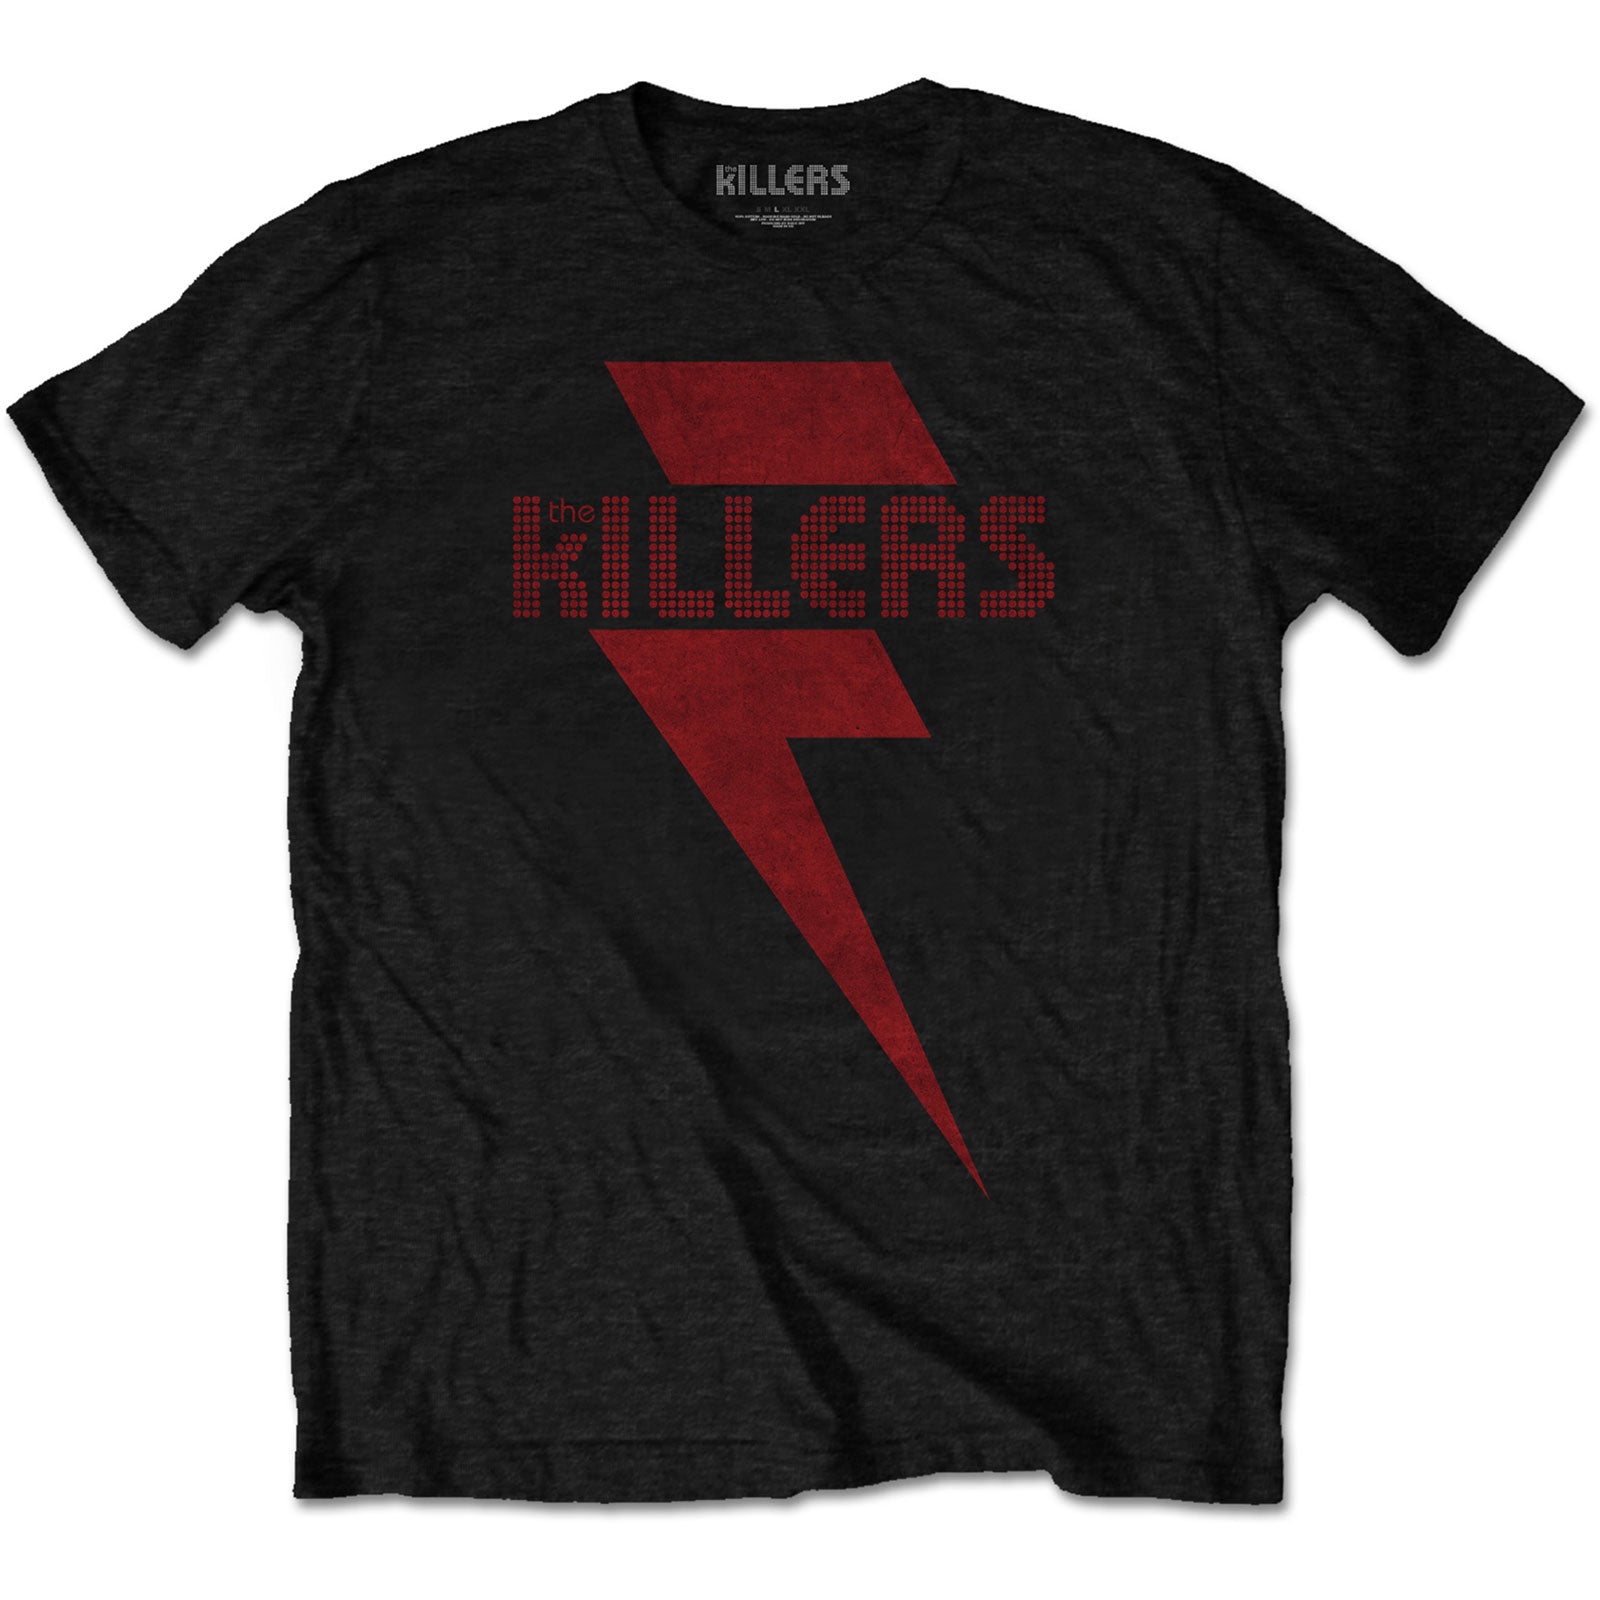 The Killers Unisex T-Shirt: Red Bolt